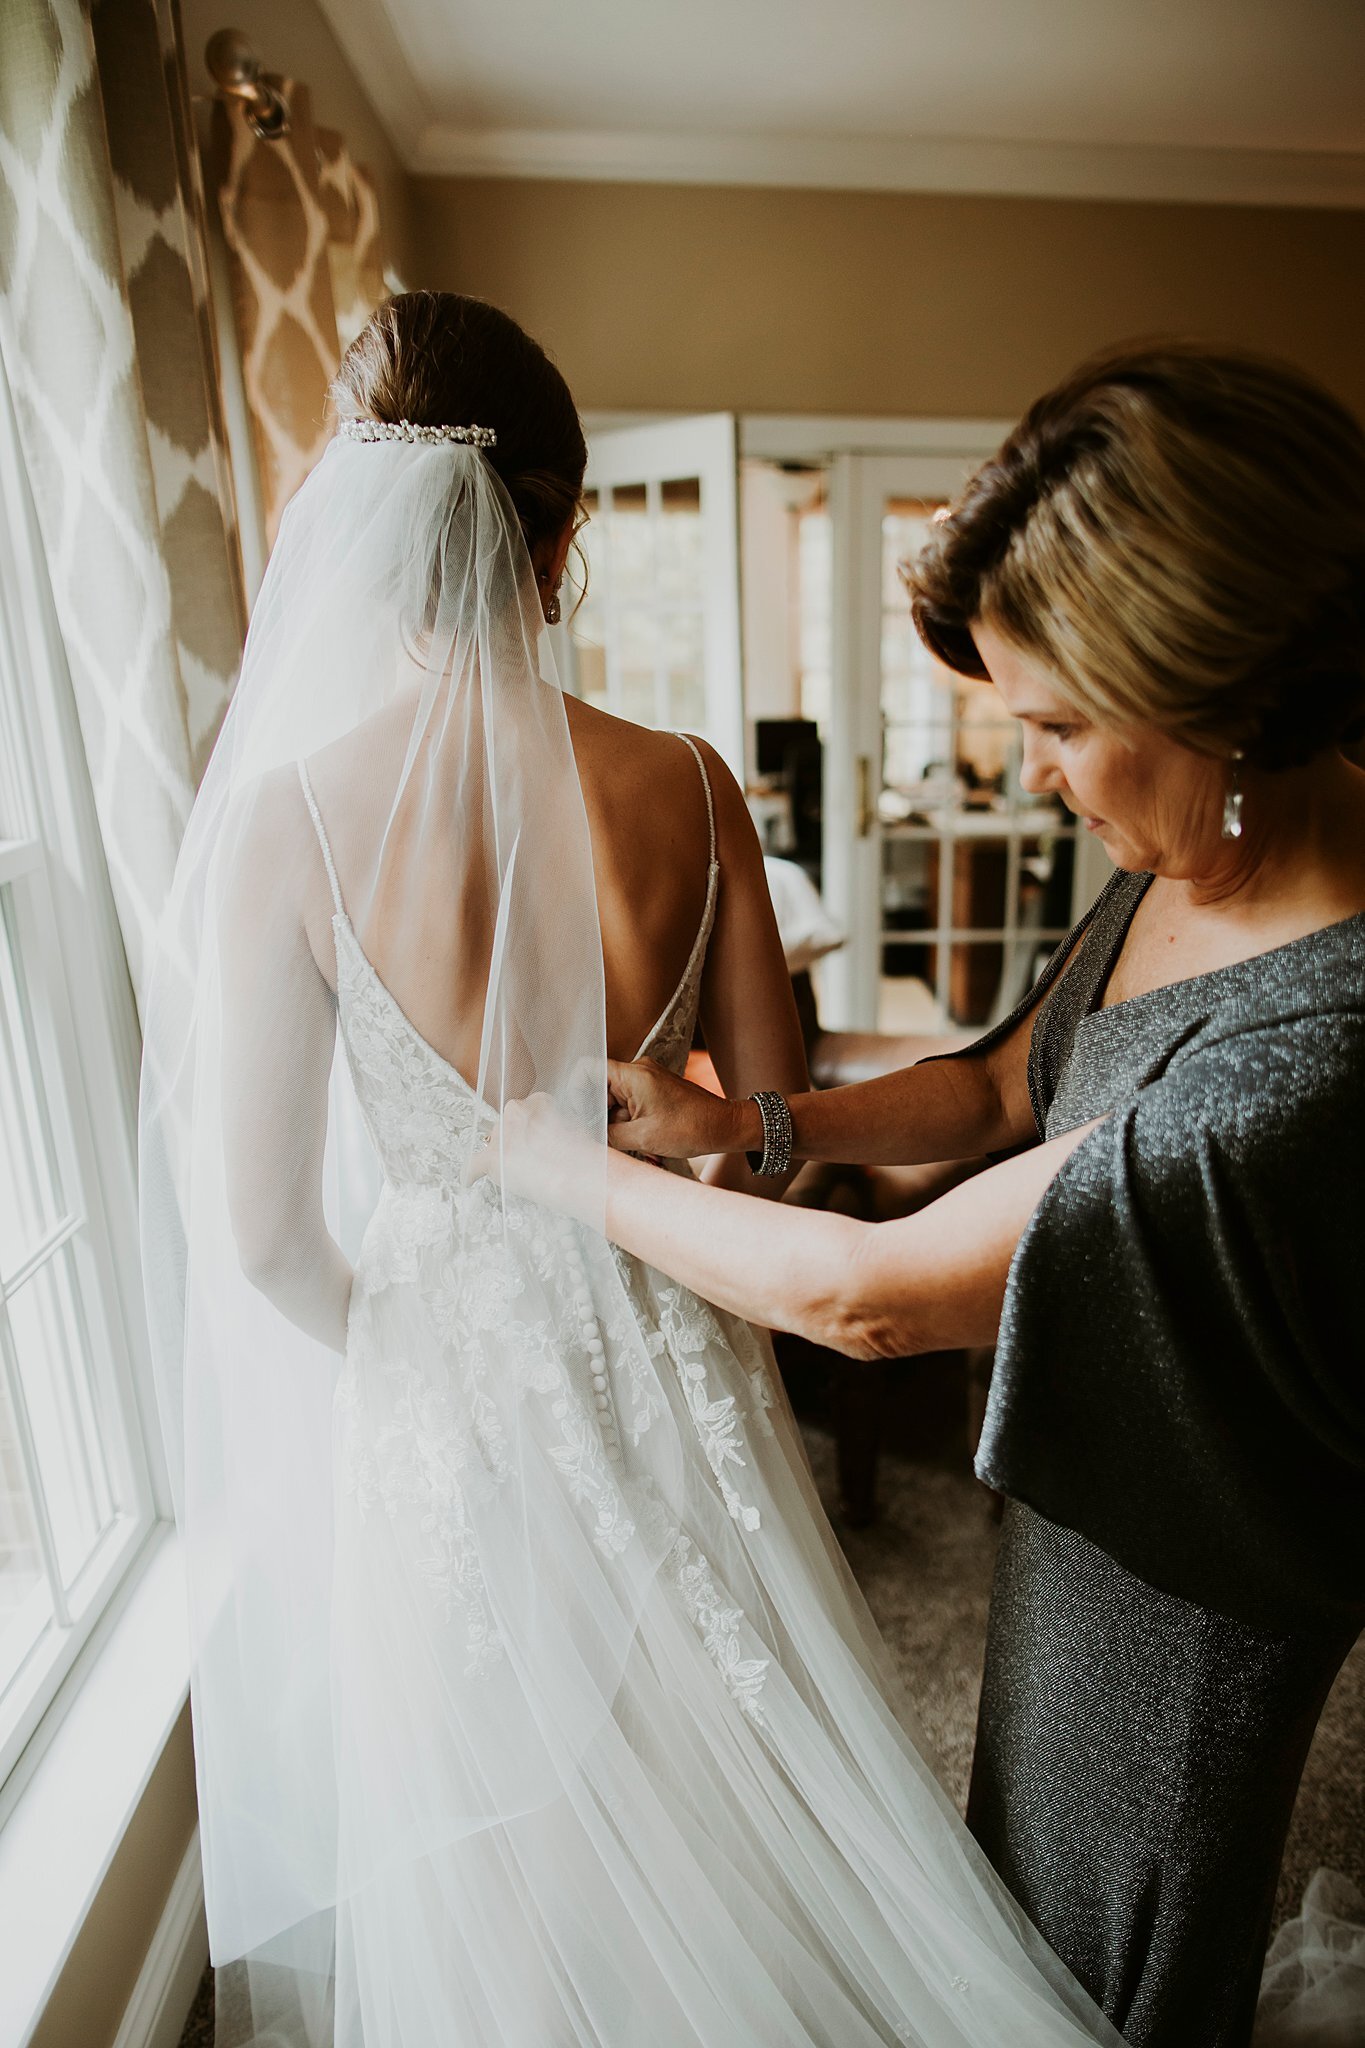  Mother and daughter getting ready for wedding day  #thatsdarling #weddingday #weddinginspiration #weddingphoto #love #justmarried #midwestphotographer #kywedding #louisville #kentuckywedding #louisvillekyweddingphotographer #weddingbliss #weddingfor